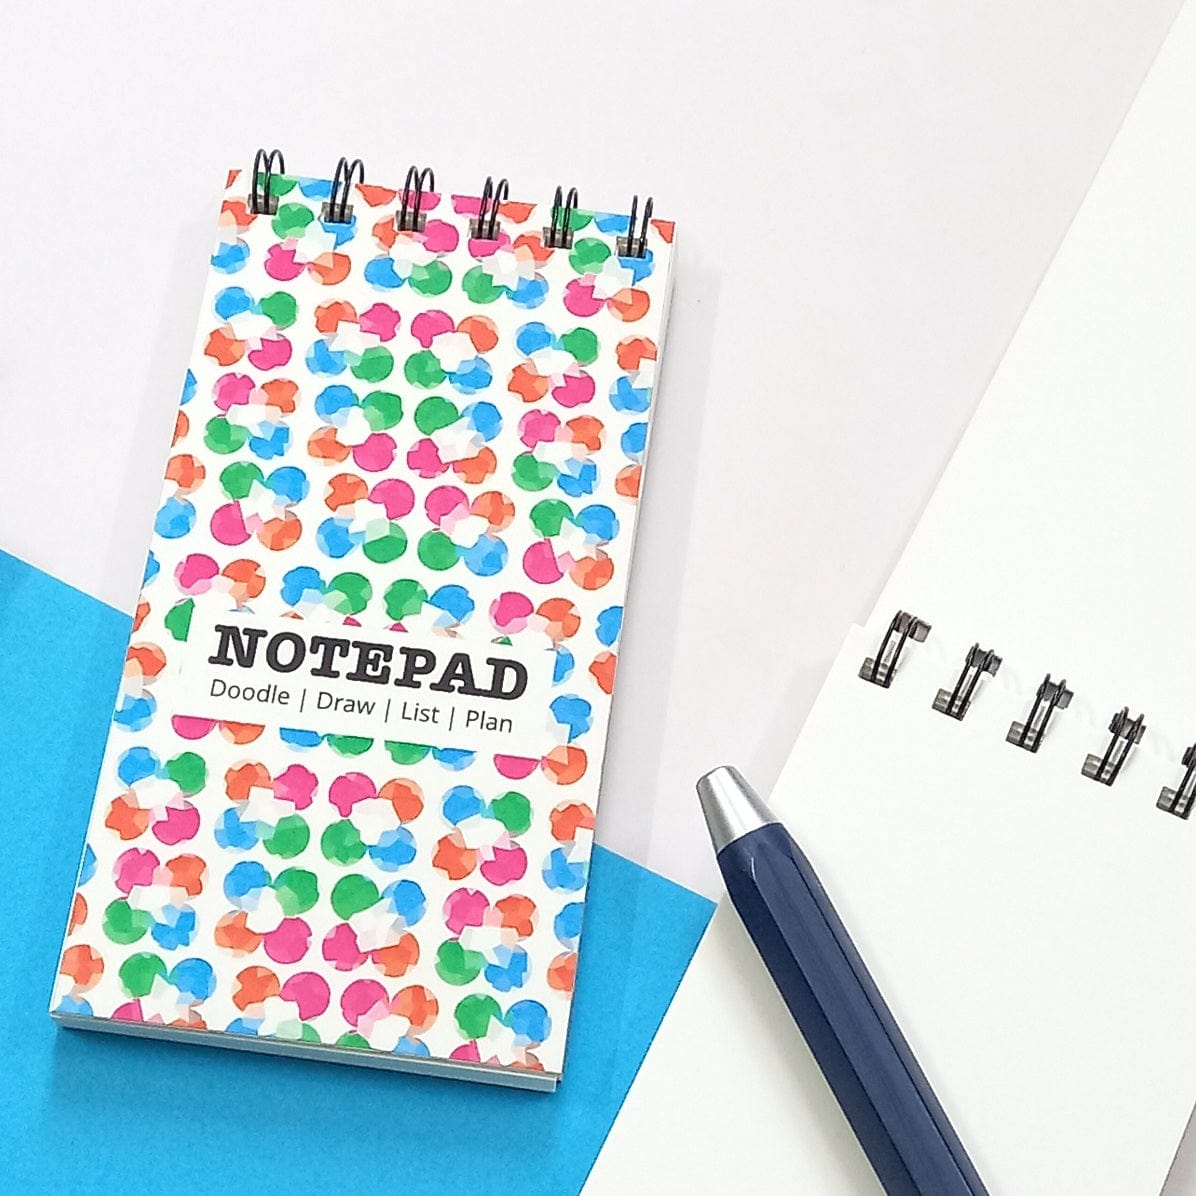 Gifts of Love Memo Fun Palette Notepads | Doodle Draw List Plan & Have Fun!